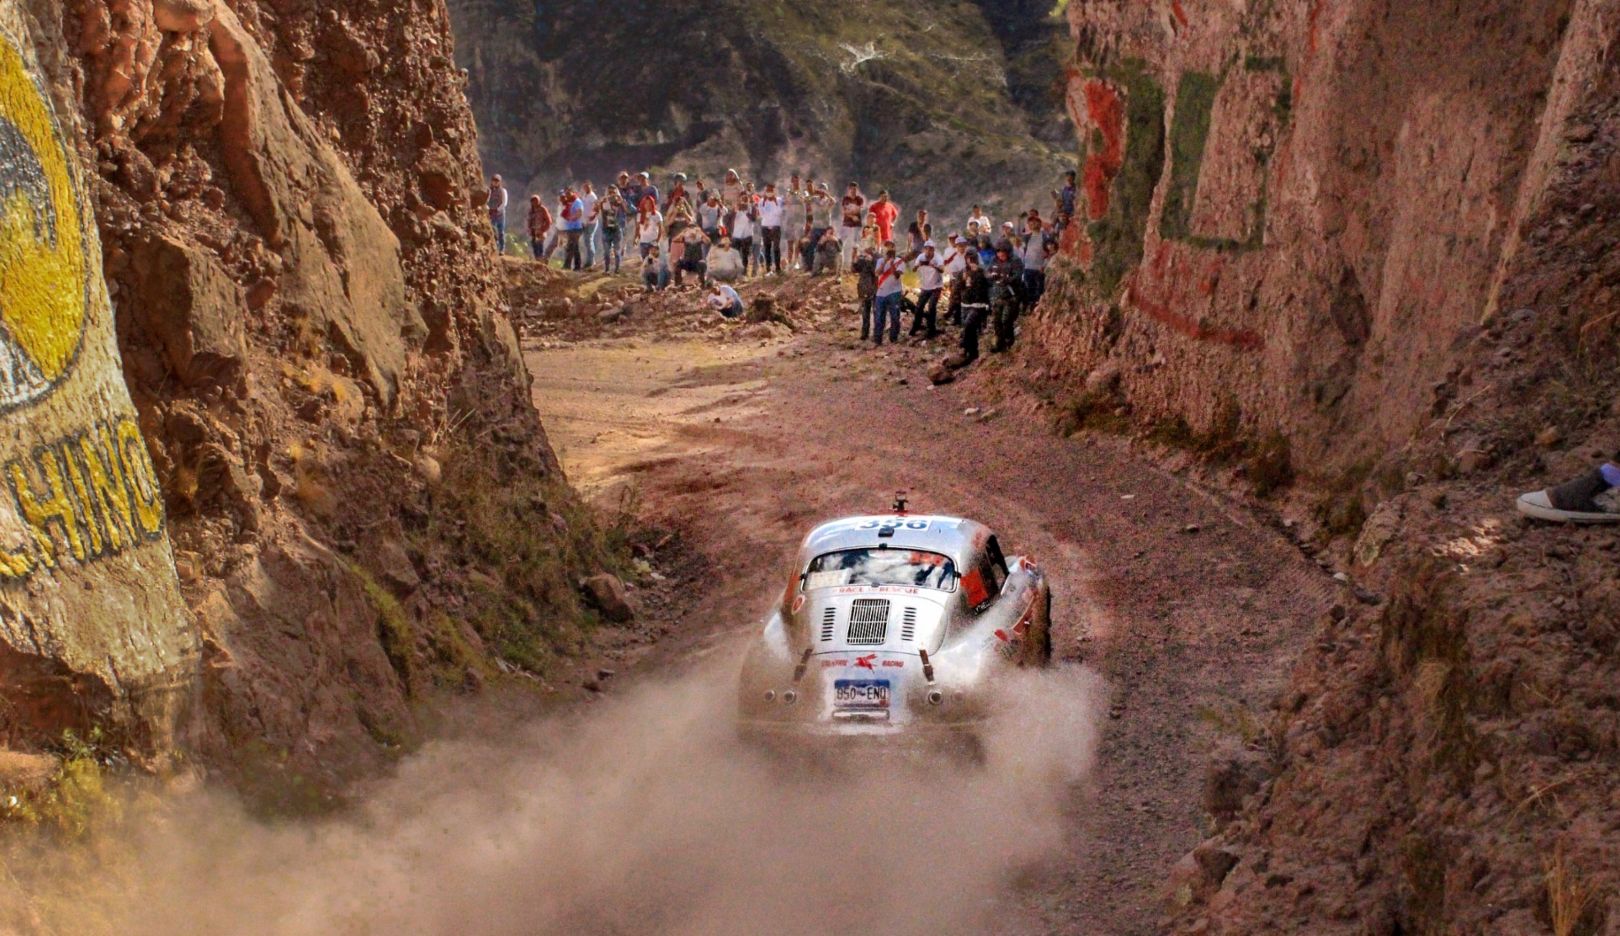 The unique Caminos del Inca classic rally passes through the south of Peru. With heights of up to 5,000 meters, the route is also an incredible physical challenge. The dirt roads demand a high level of concentration and a reliable vehicle. 